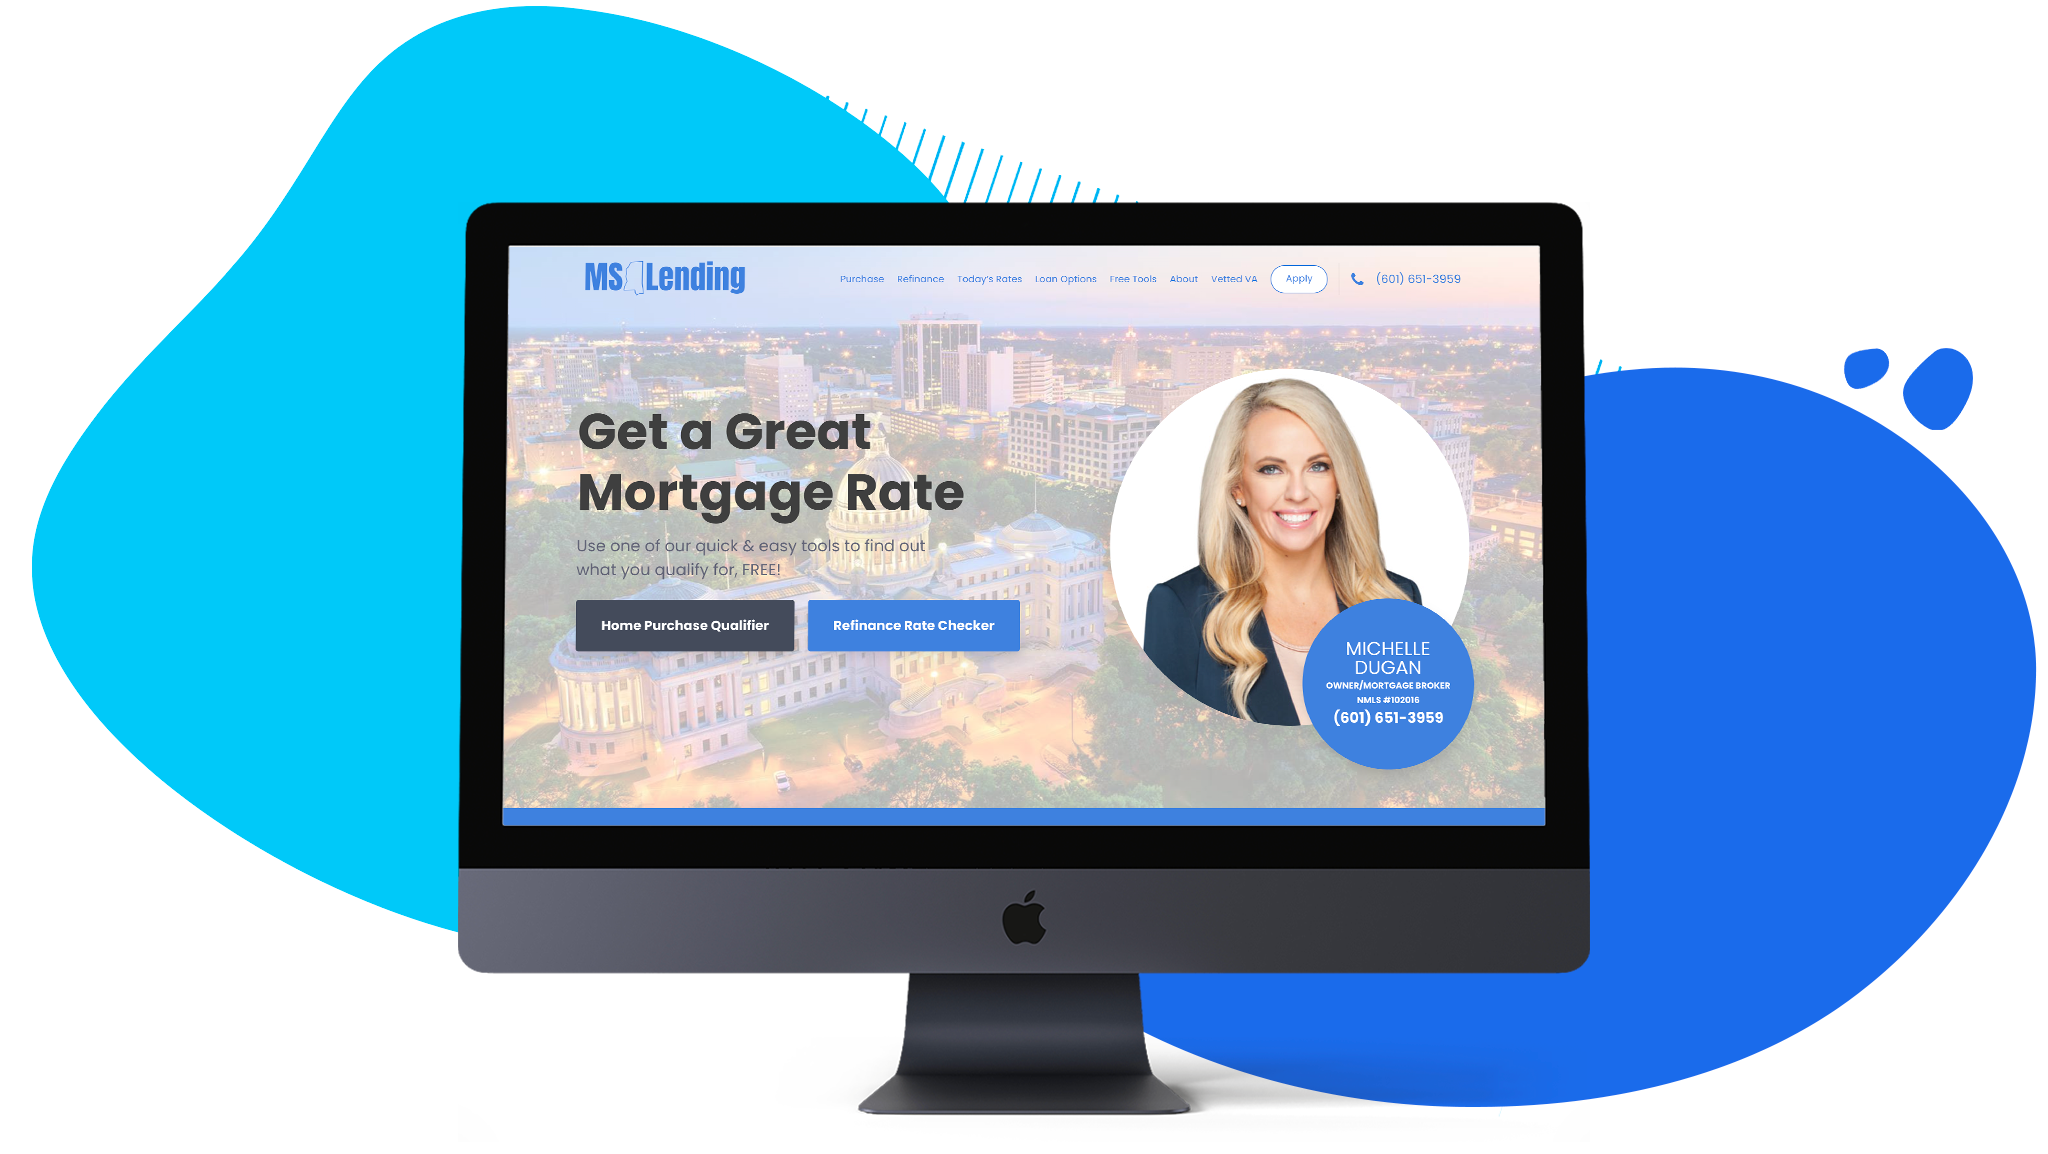 Michelle Dugan's website for MS Lending is designed to convert visitors into leads